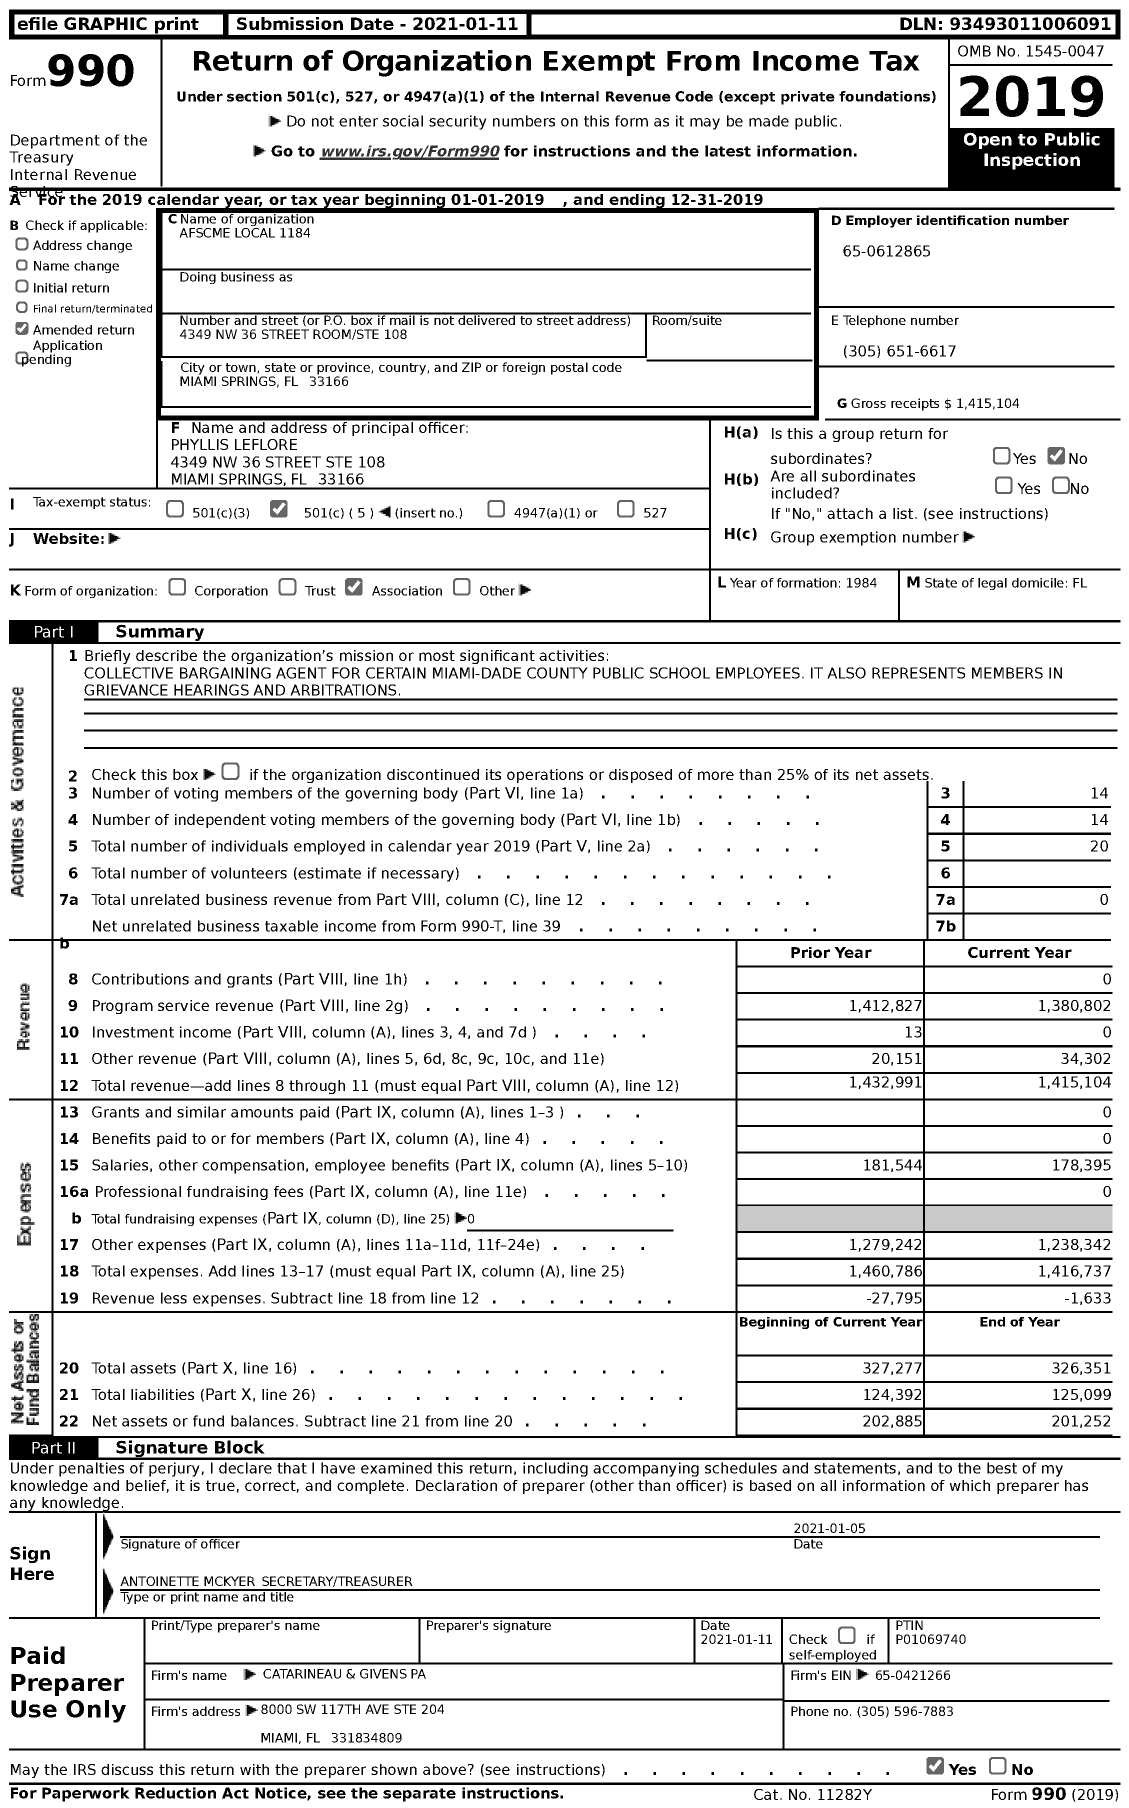 Image of first page of 2019 Form 990 for American Federation of State County & Municipal Employees - L1184FL Dade Co Fla School BD Emps